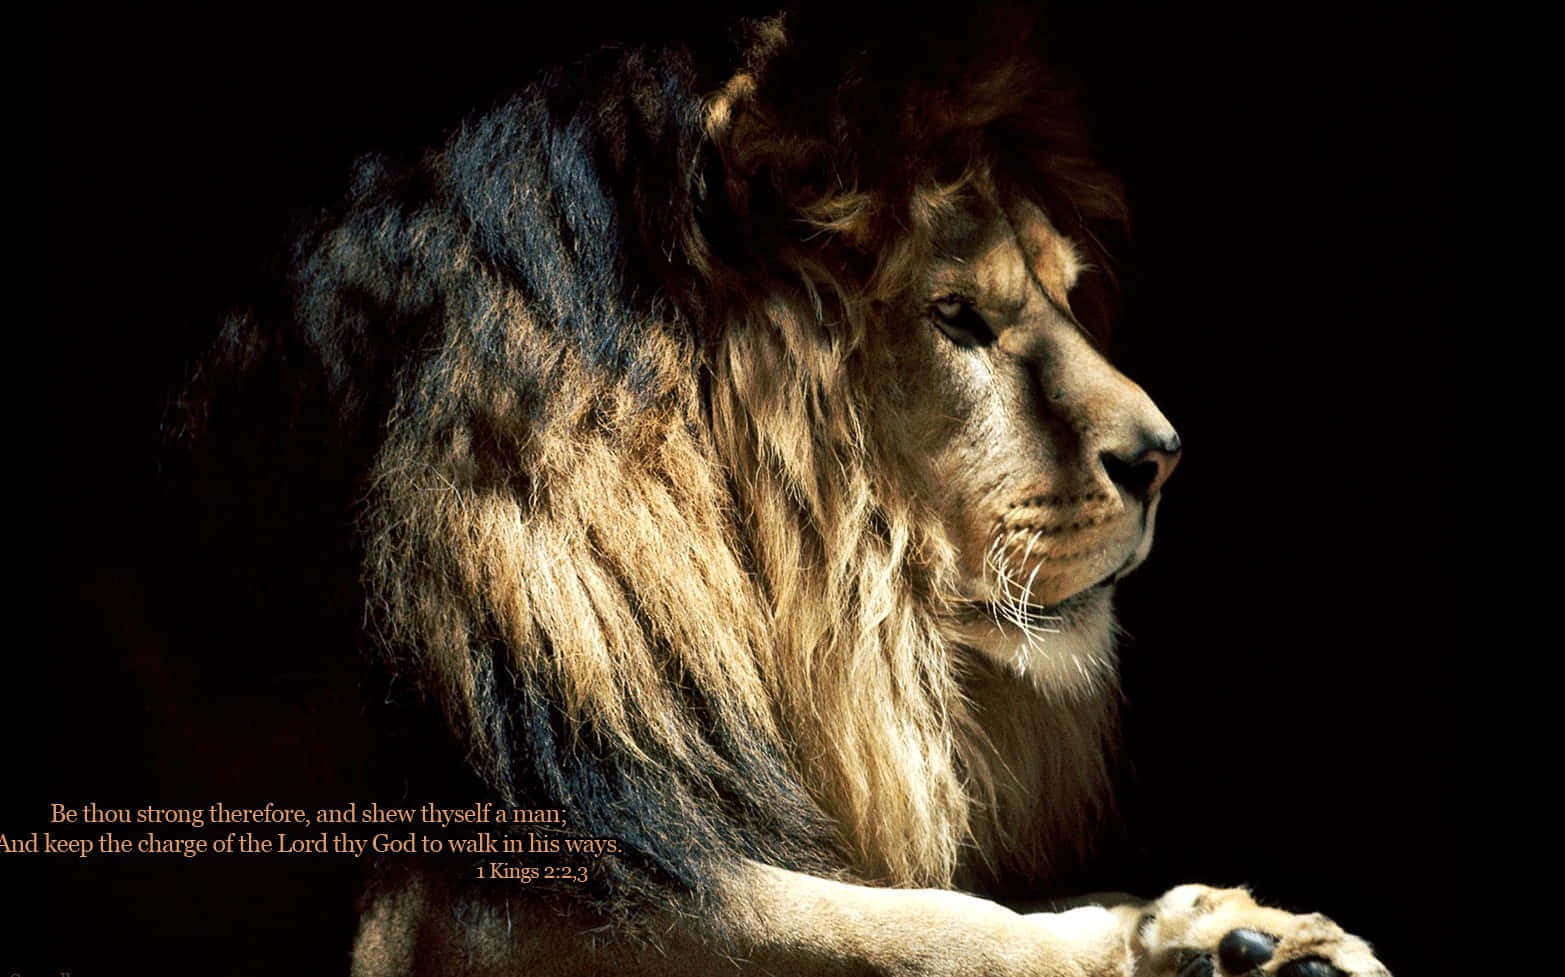 “The Lion of Judah: Symbol of Strength and Courage"